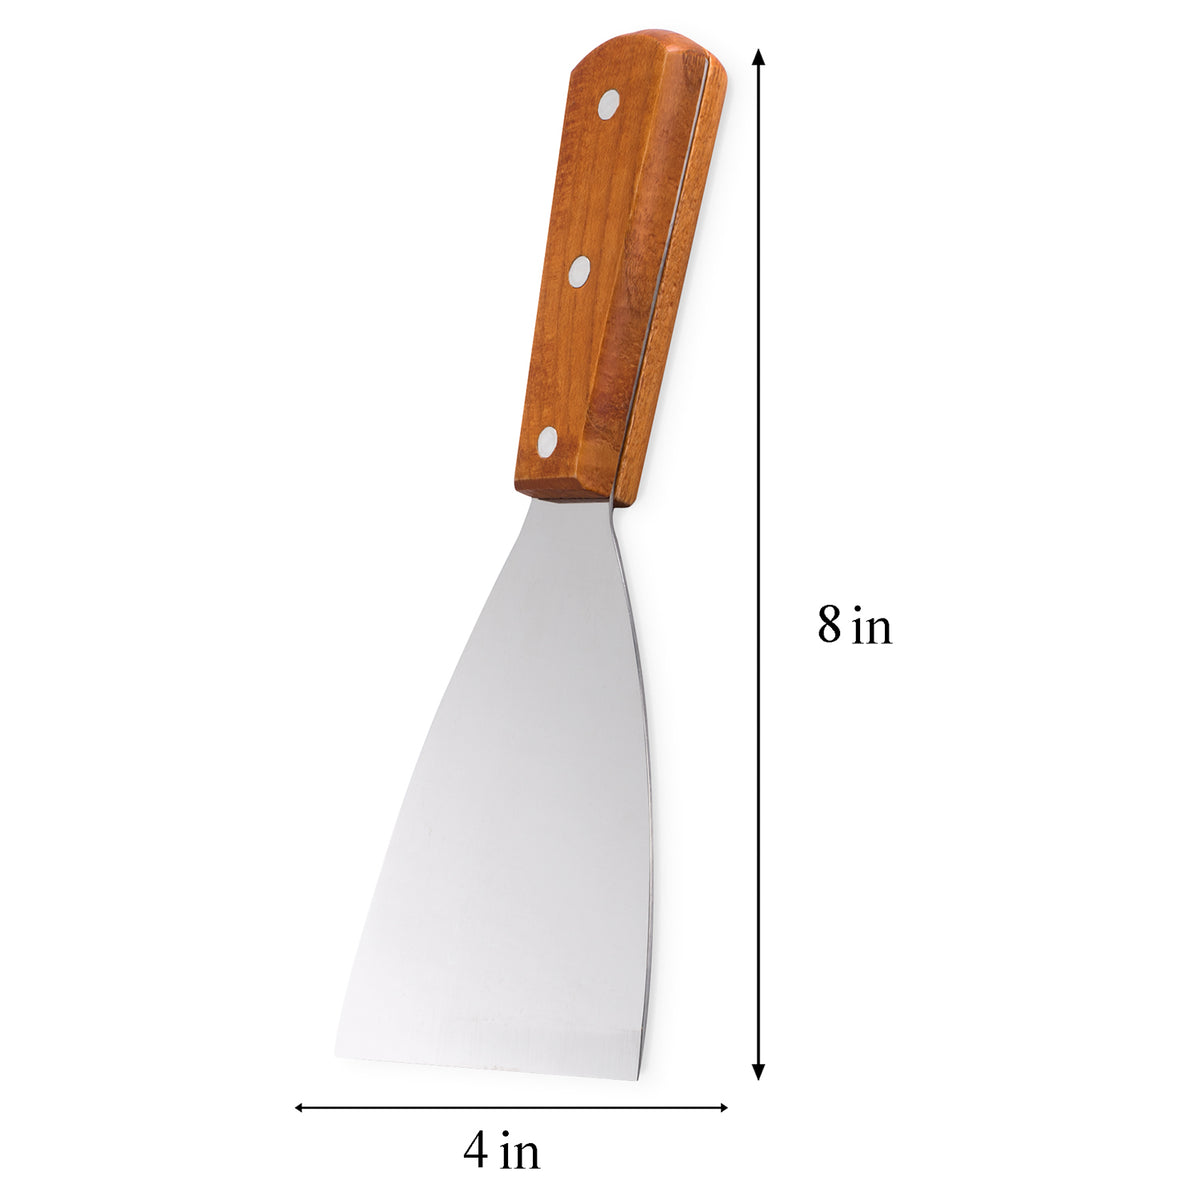 Stainless Steel Blade Grill Slant Edge Scraper Wooden Handle For Food  Service, Cleaning Supplies, Barbecue Cooking Restaurants